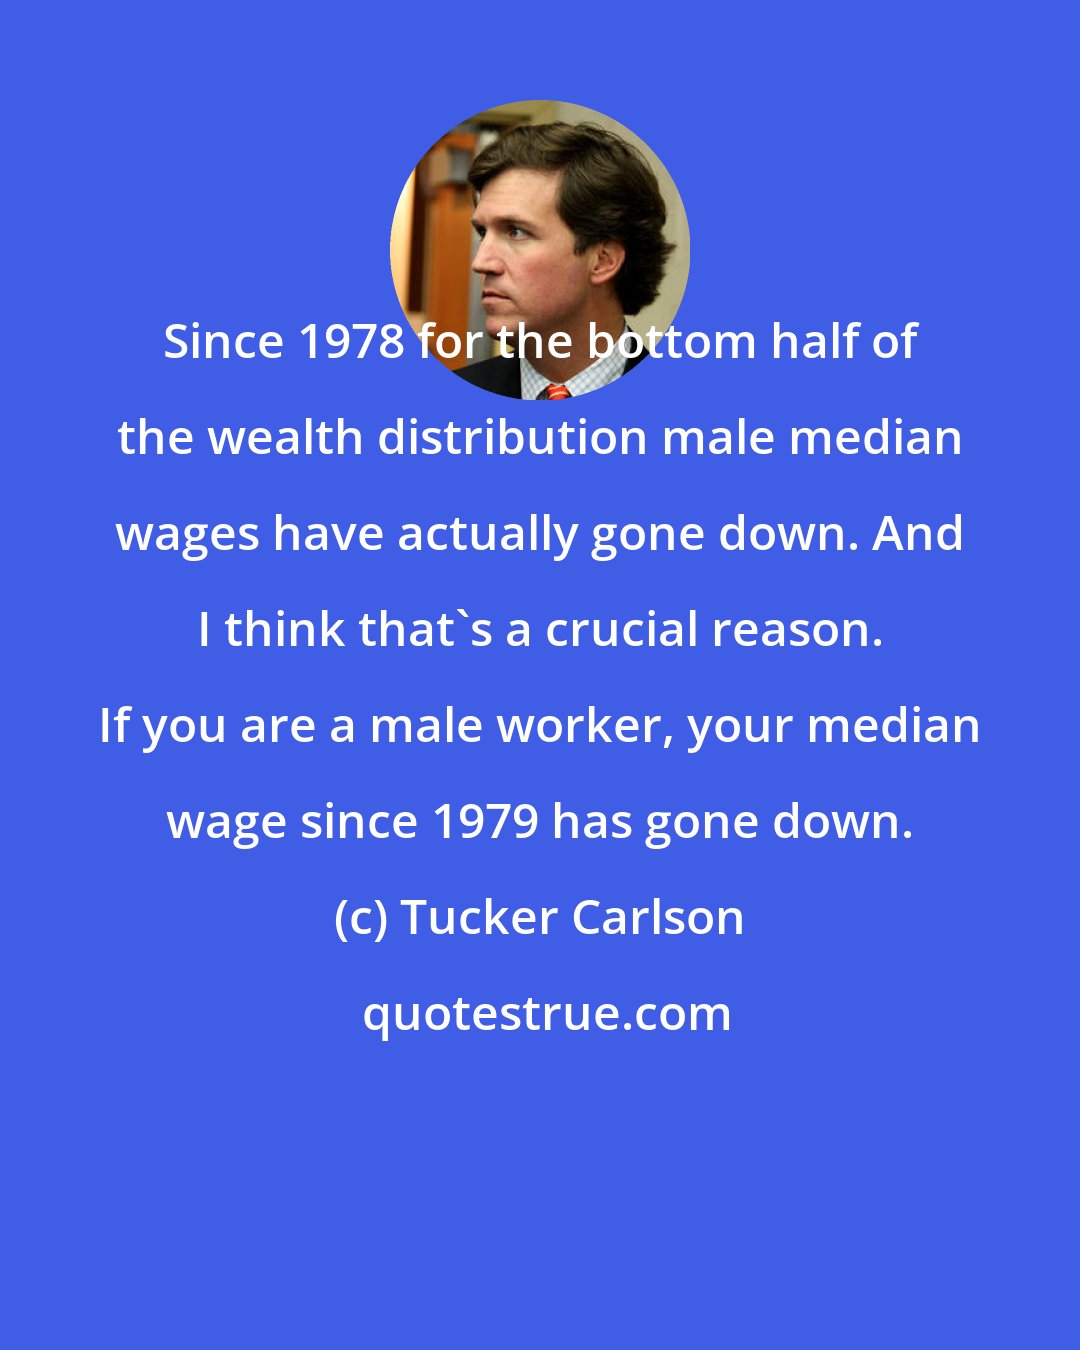 Tucker Carlson: Since 1978 for the bottom half of the wealth distribution male median wages have actually gone down. And I think that's a crucial reason. If you are a male worker, your median wage since 1979 has gone down.